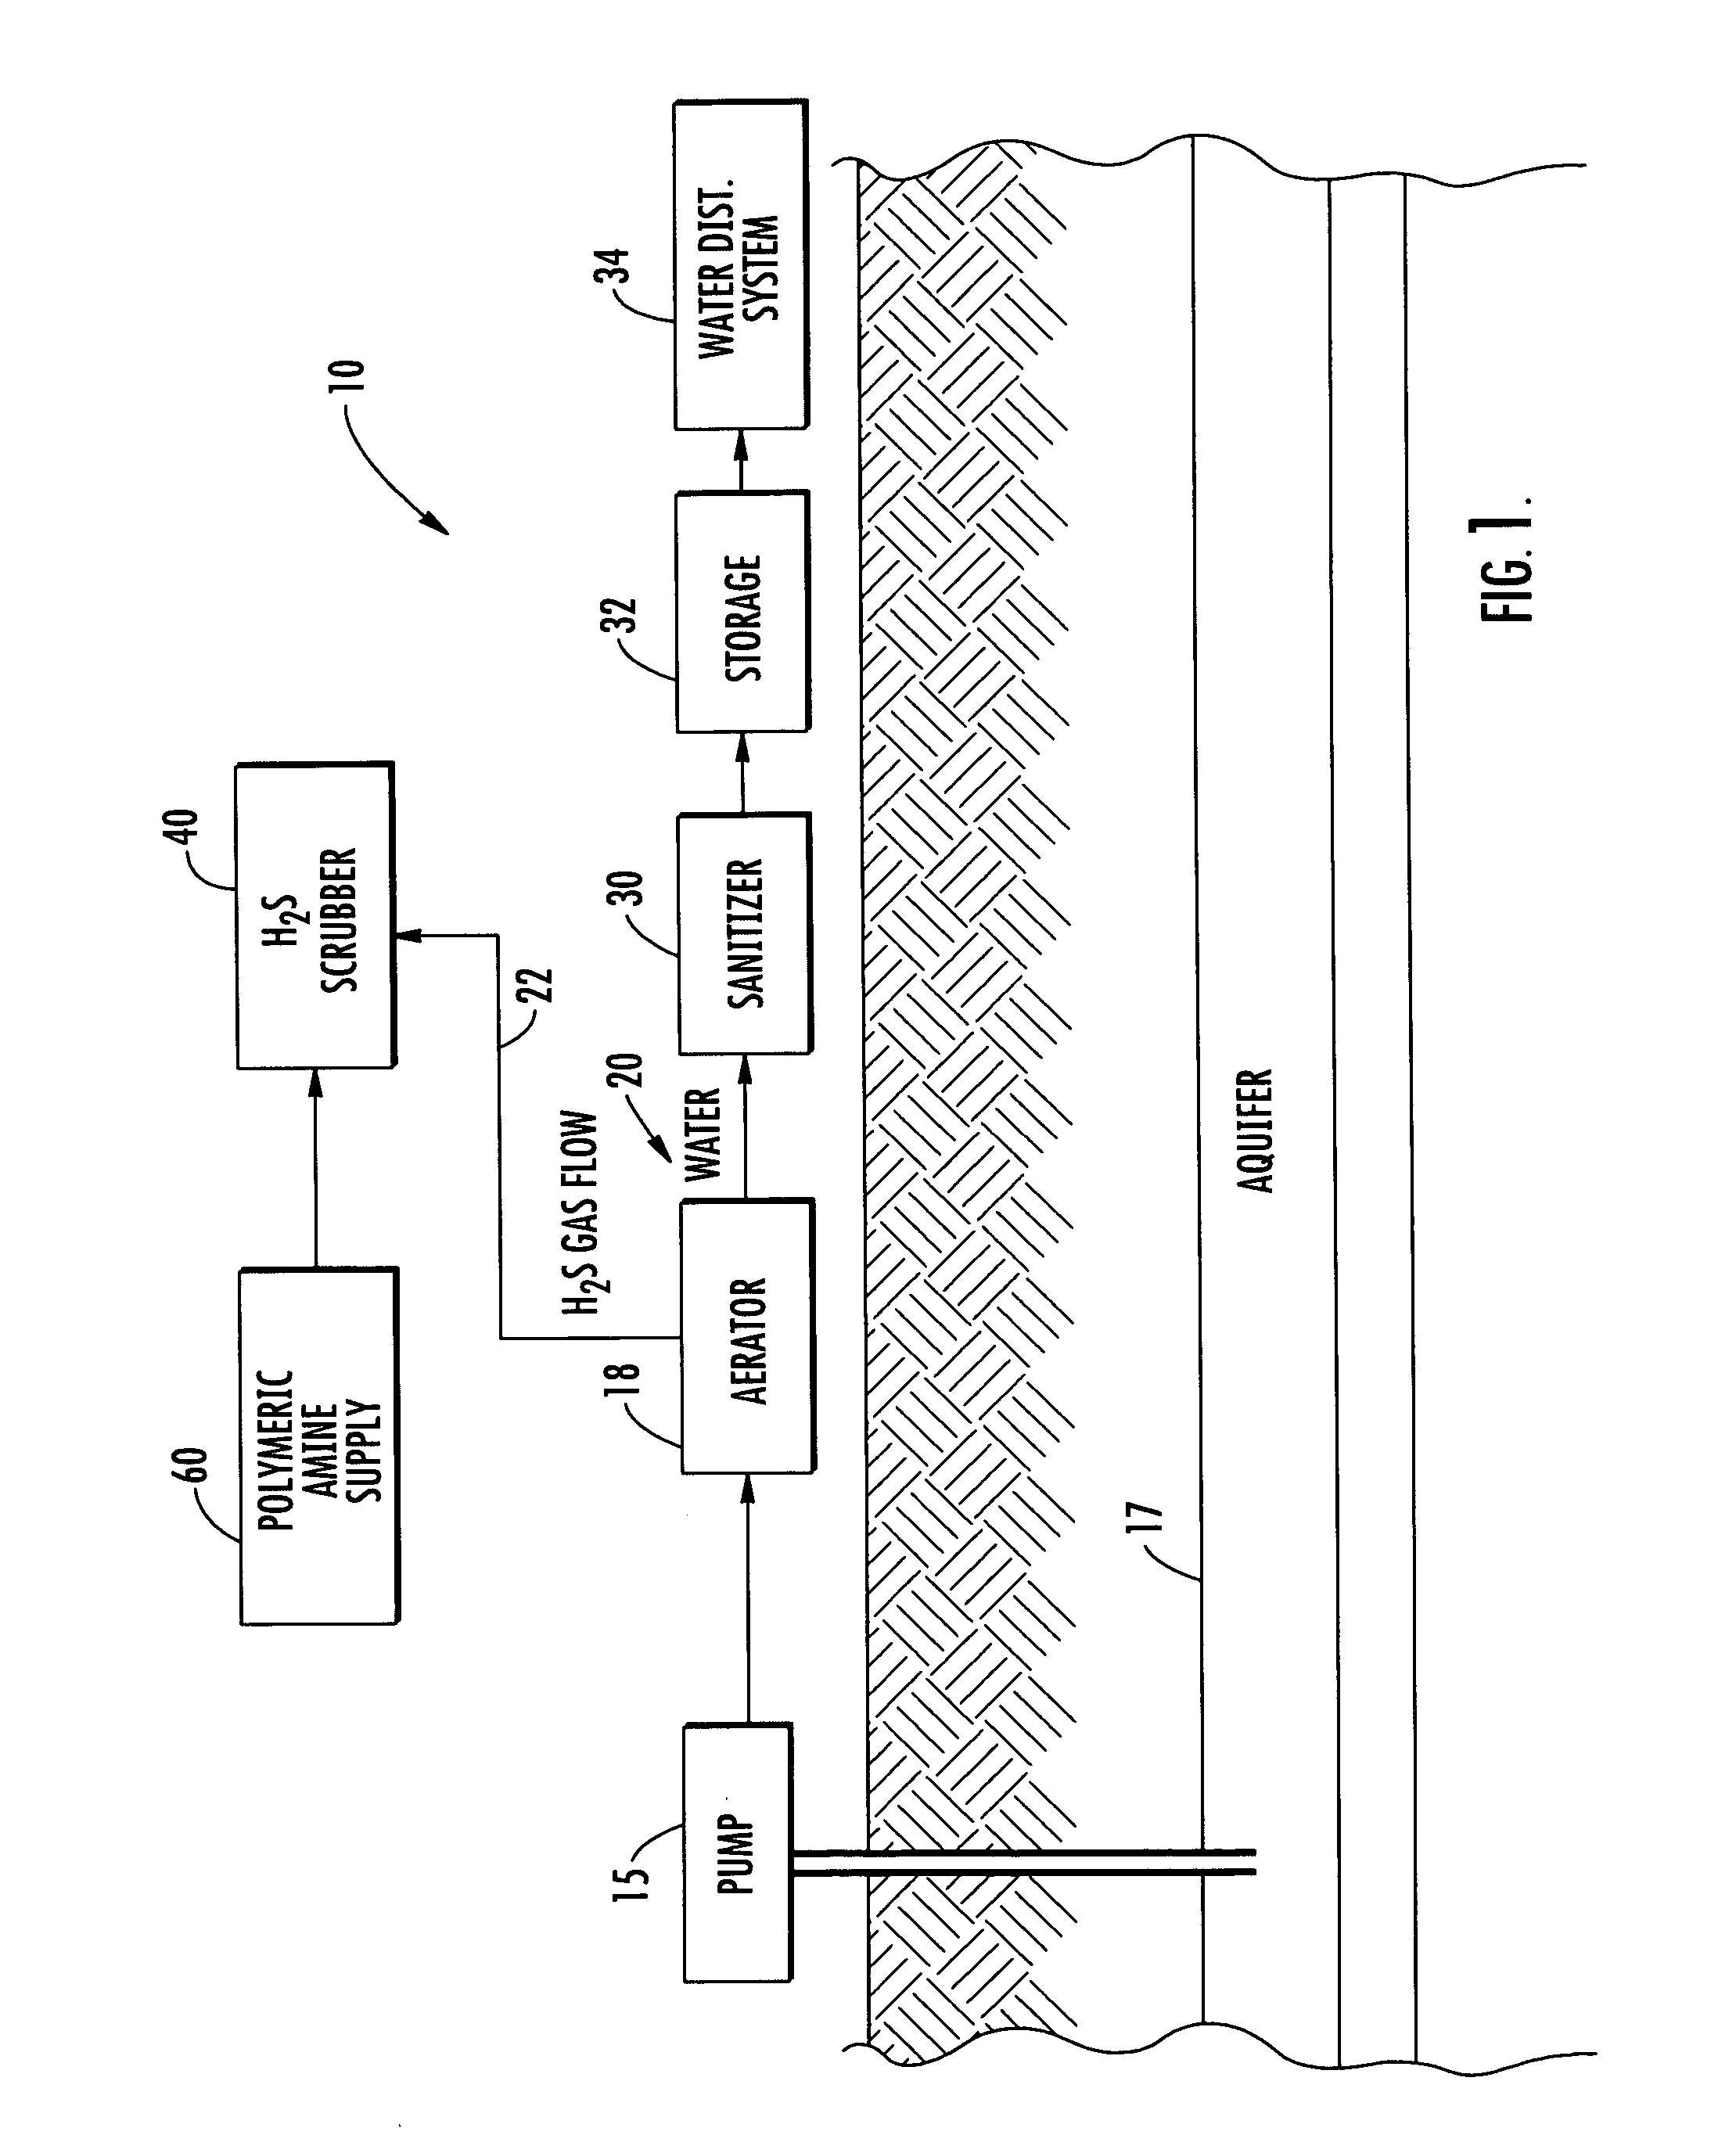 Hydrogen sulfide scrubber using polymeric amine and associated methods